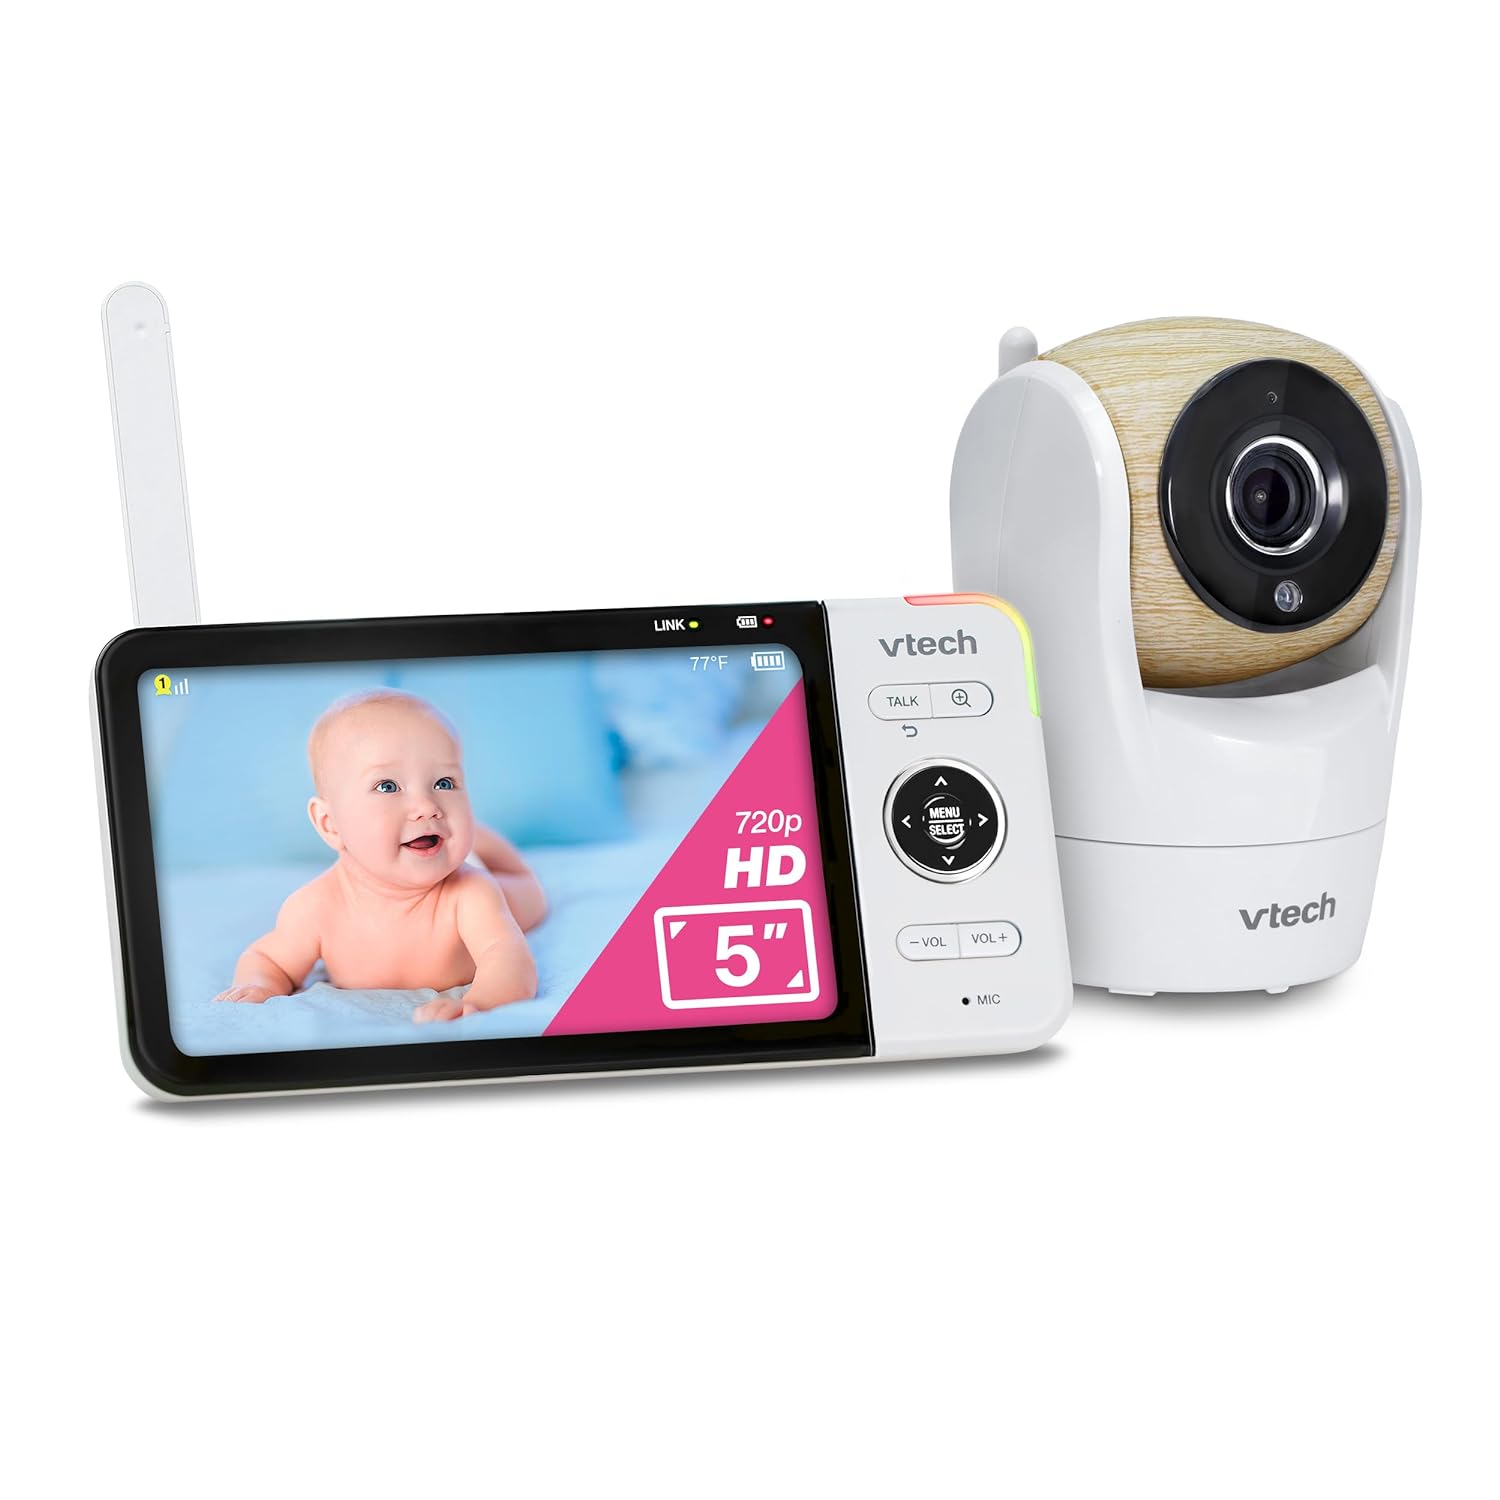 VTech VM928HD Baby Monitor, 5" 720p Screen, Pan-Tilt-Zoom, 110 Wide-Angle View, HD Night Vision, Up to 1000ft Range, Sec